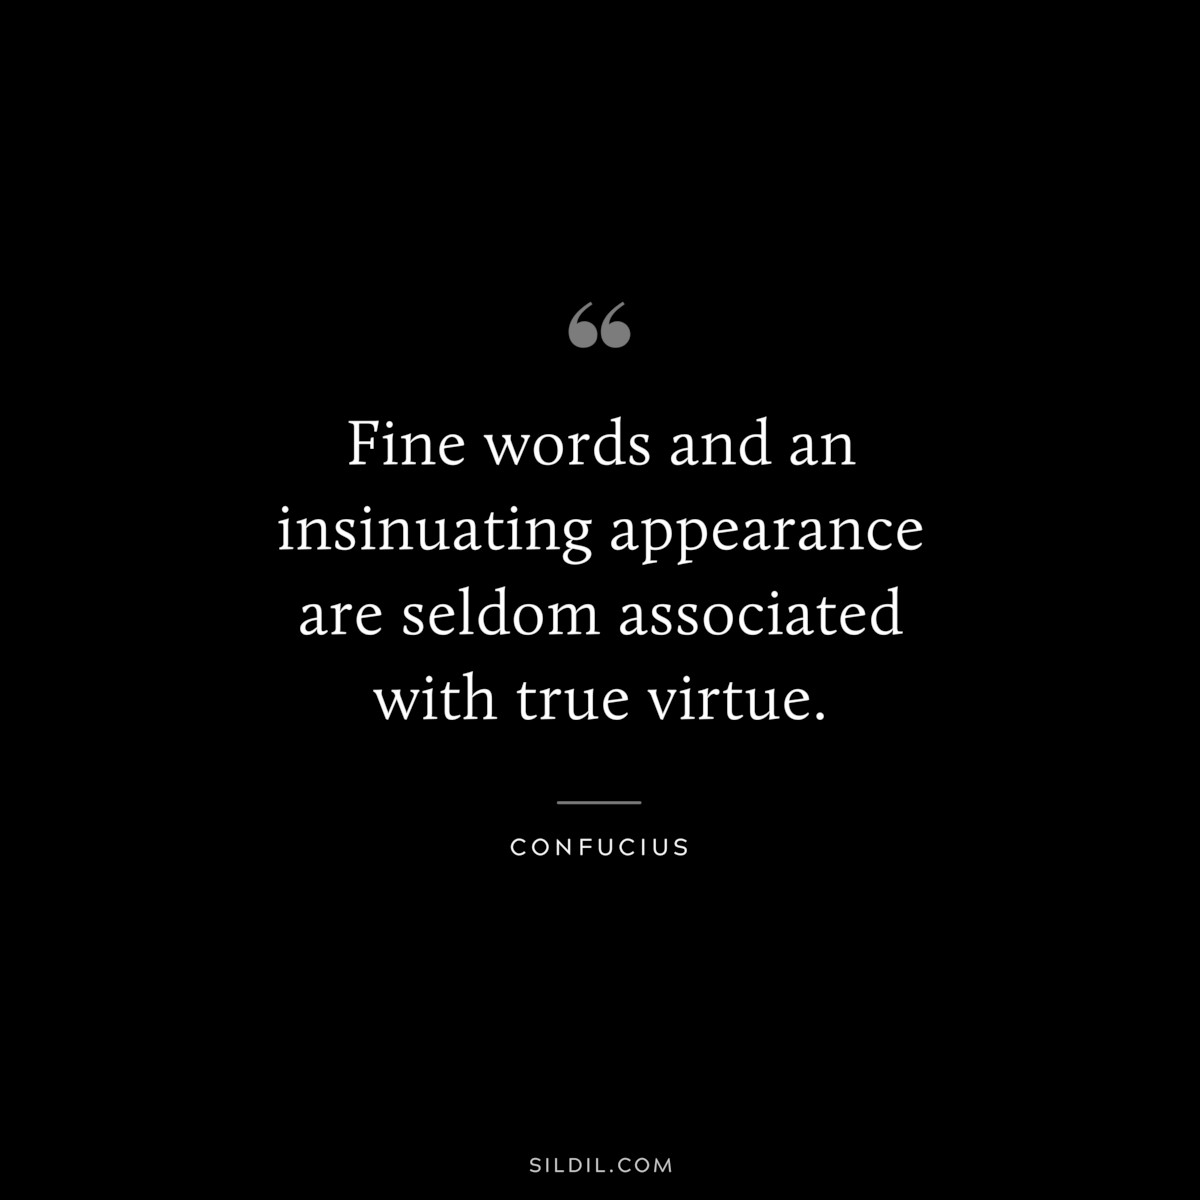 Fine words and an insinuating appearance are seldom associated with true virtue. ― Confucius